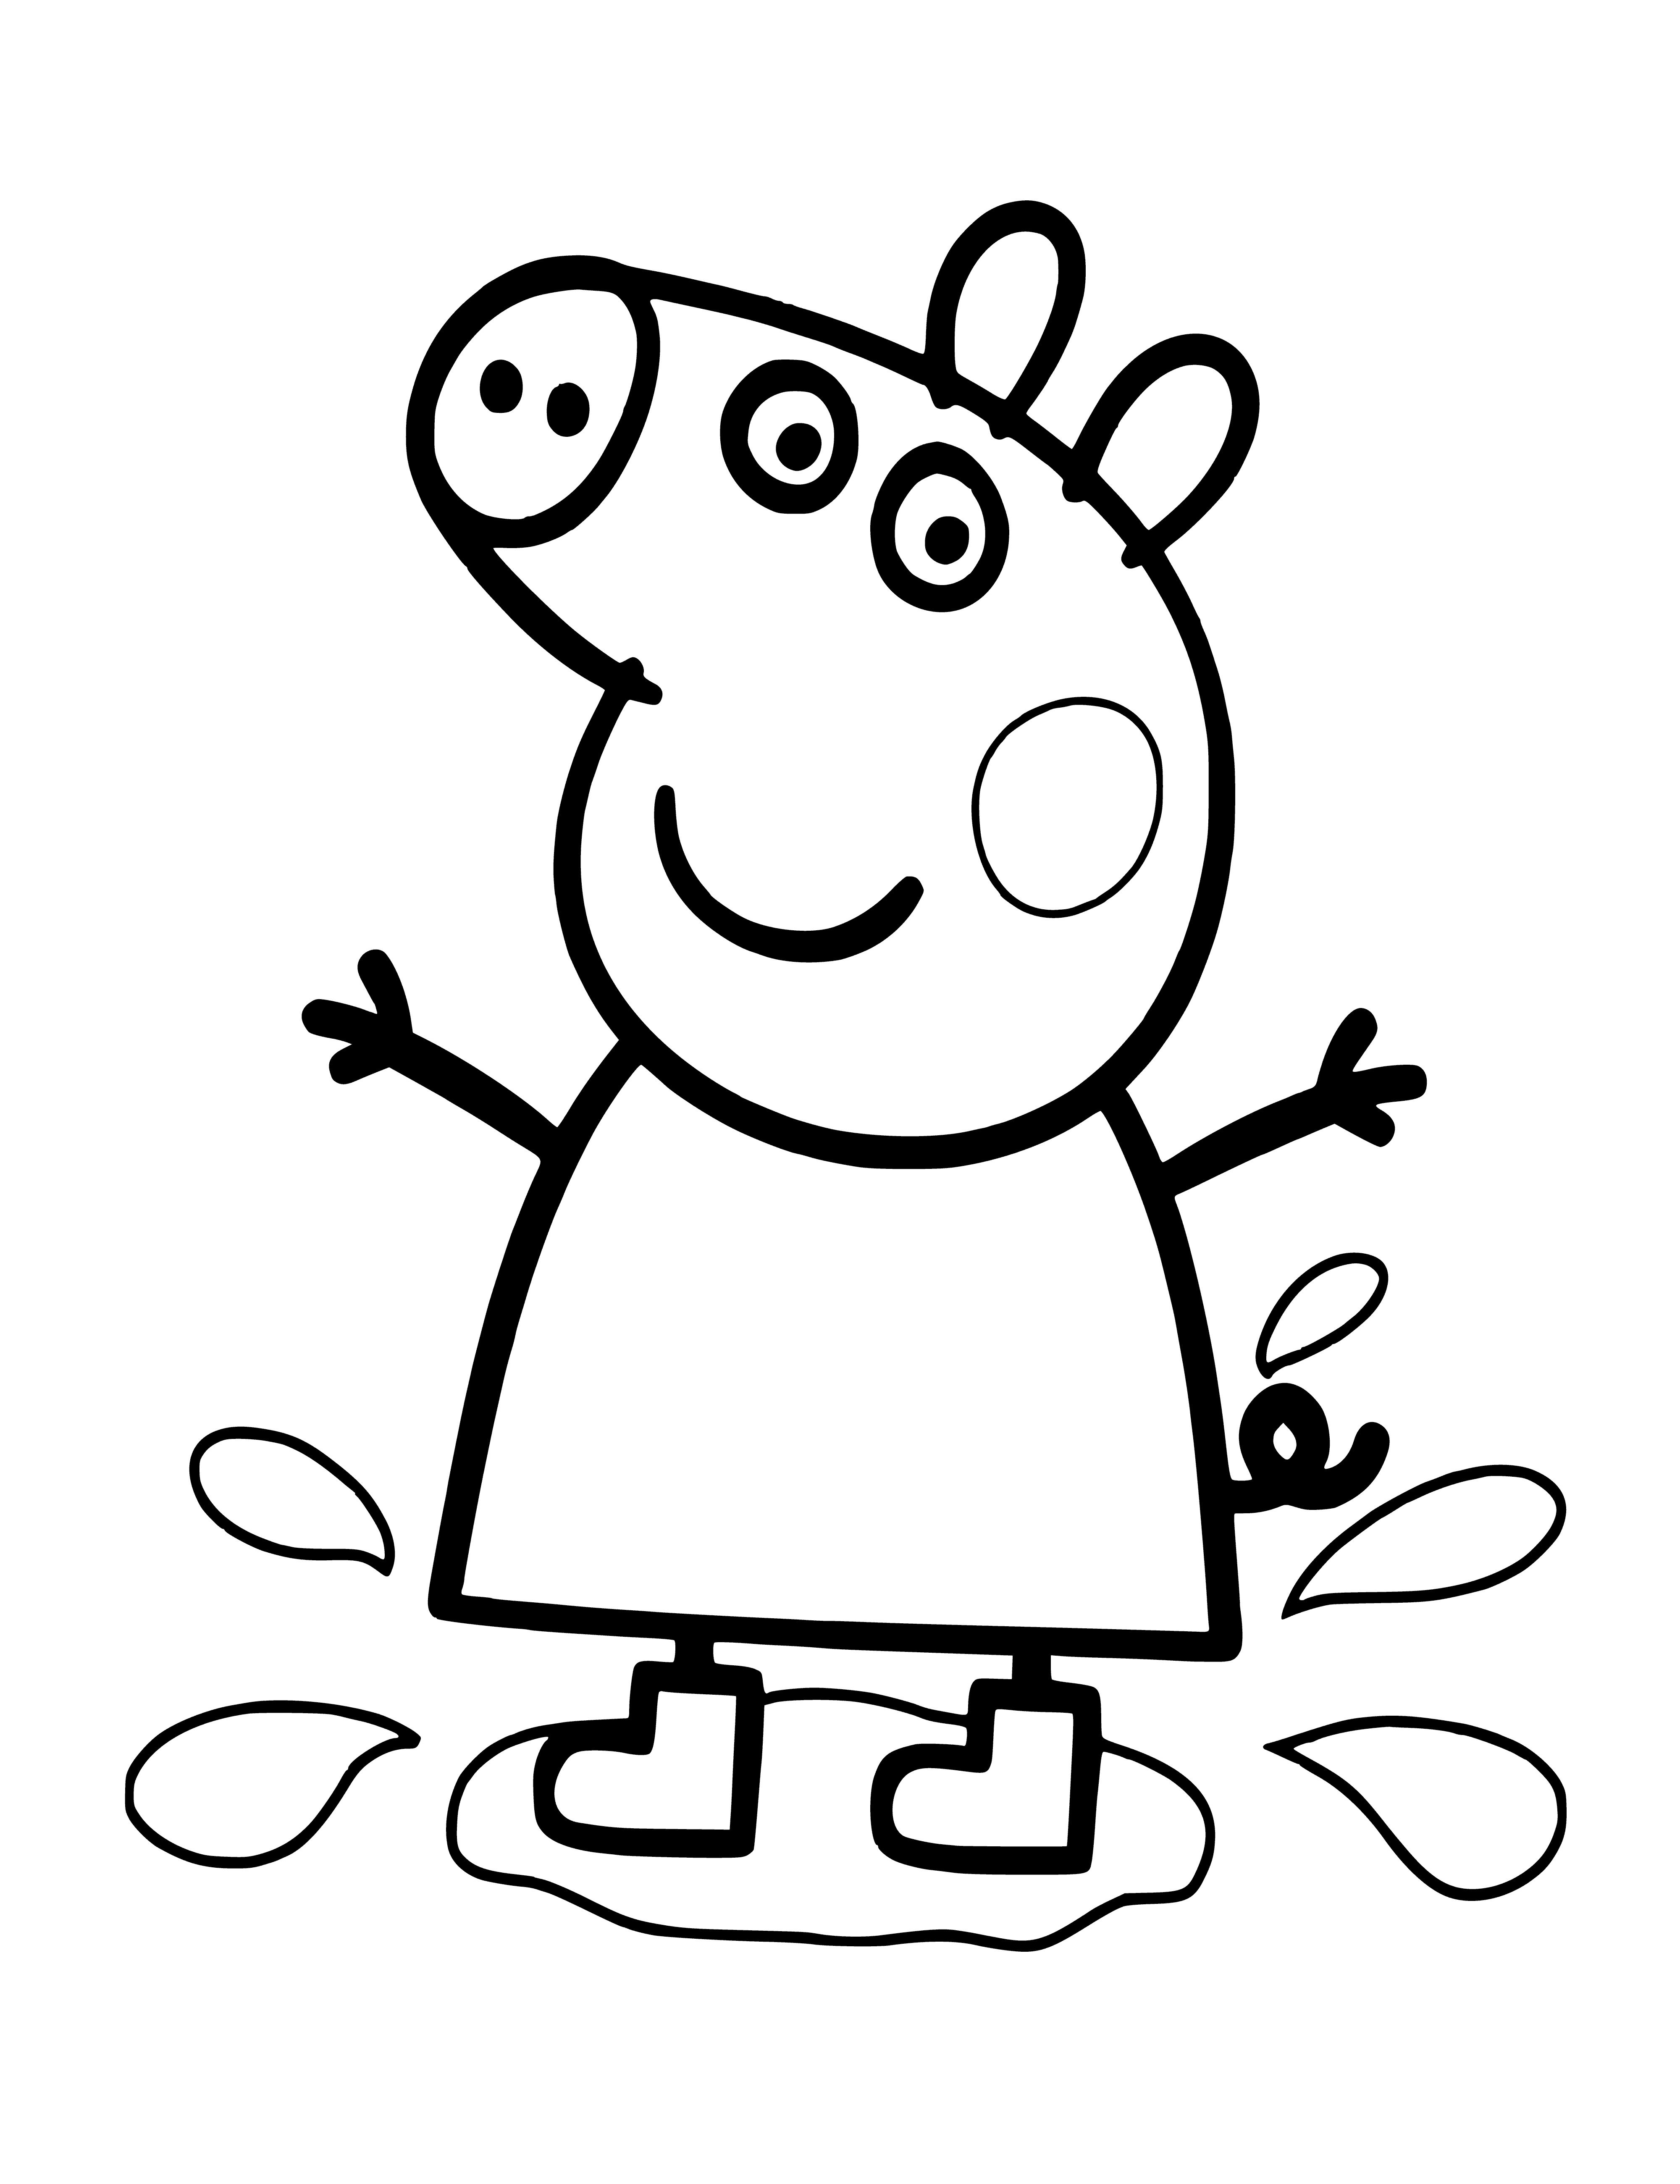 Peppa in a puddle coloring page